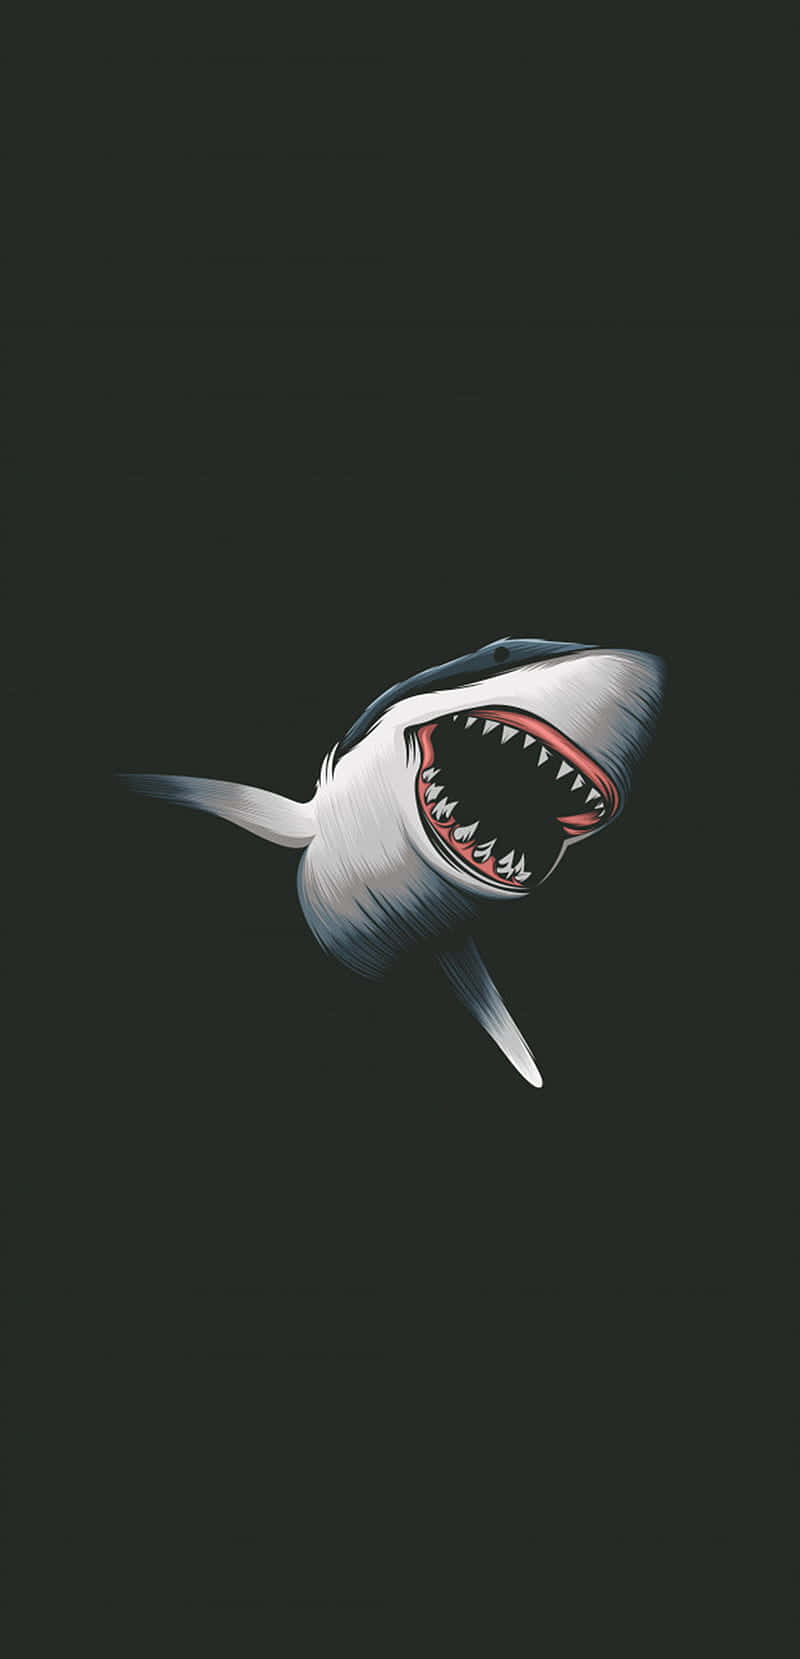 A Shark With Its Mouth Open In The Dark Wallpaper